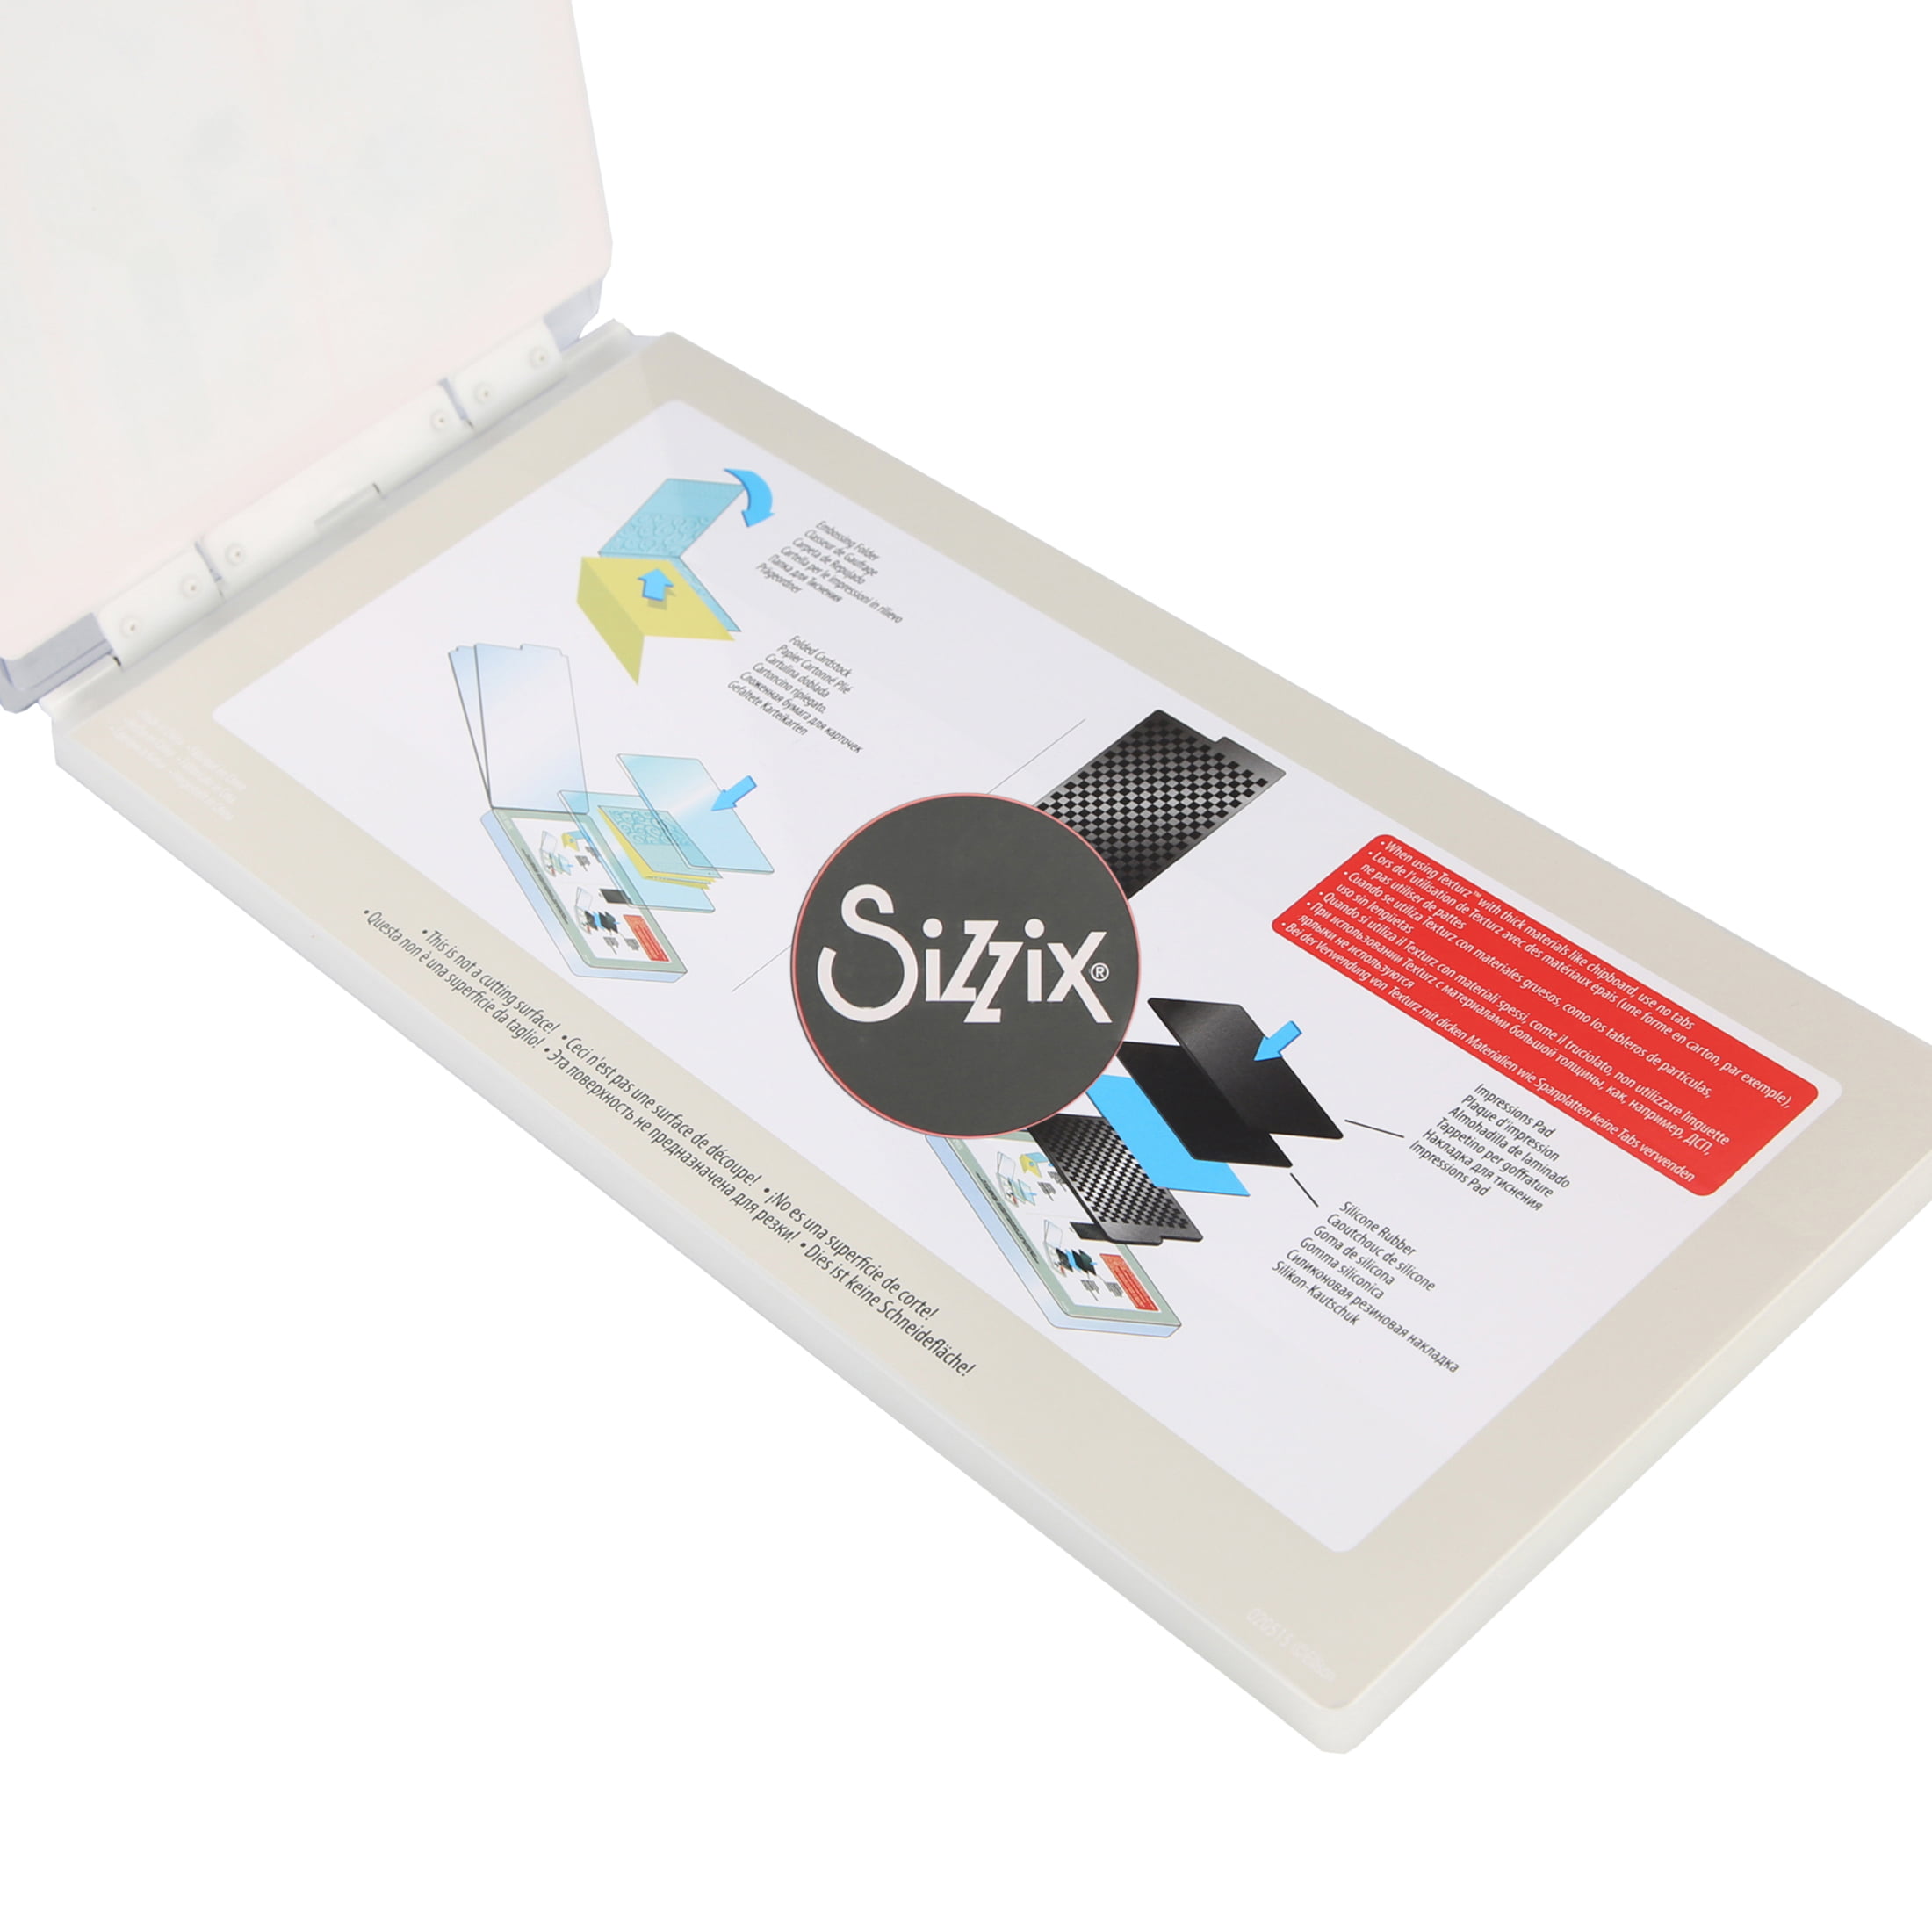 Sizzix - White and Gray - Big Shot Machine with Exclusive Ocean Cutting Pads